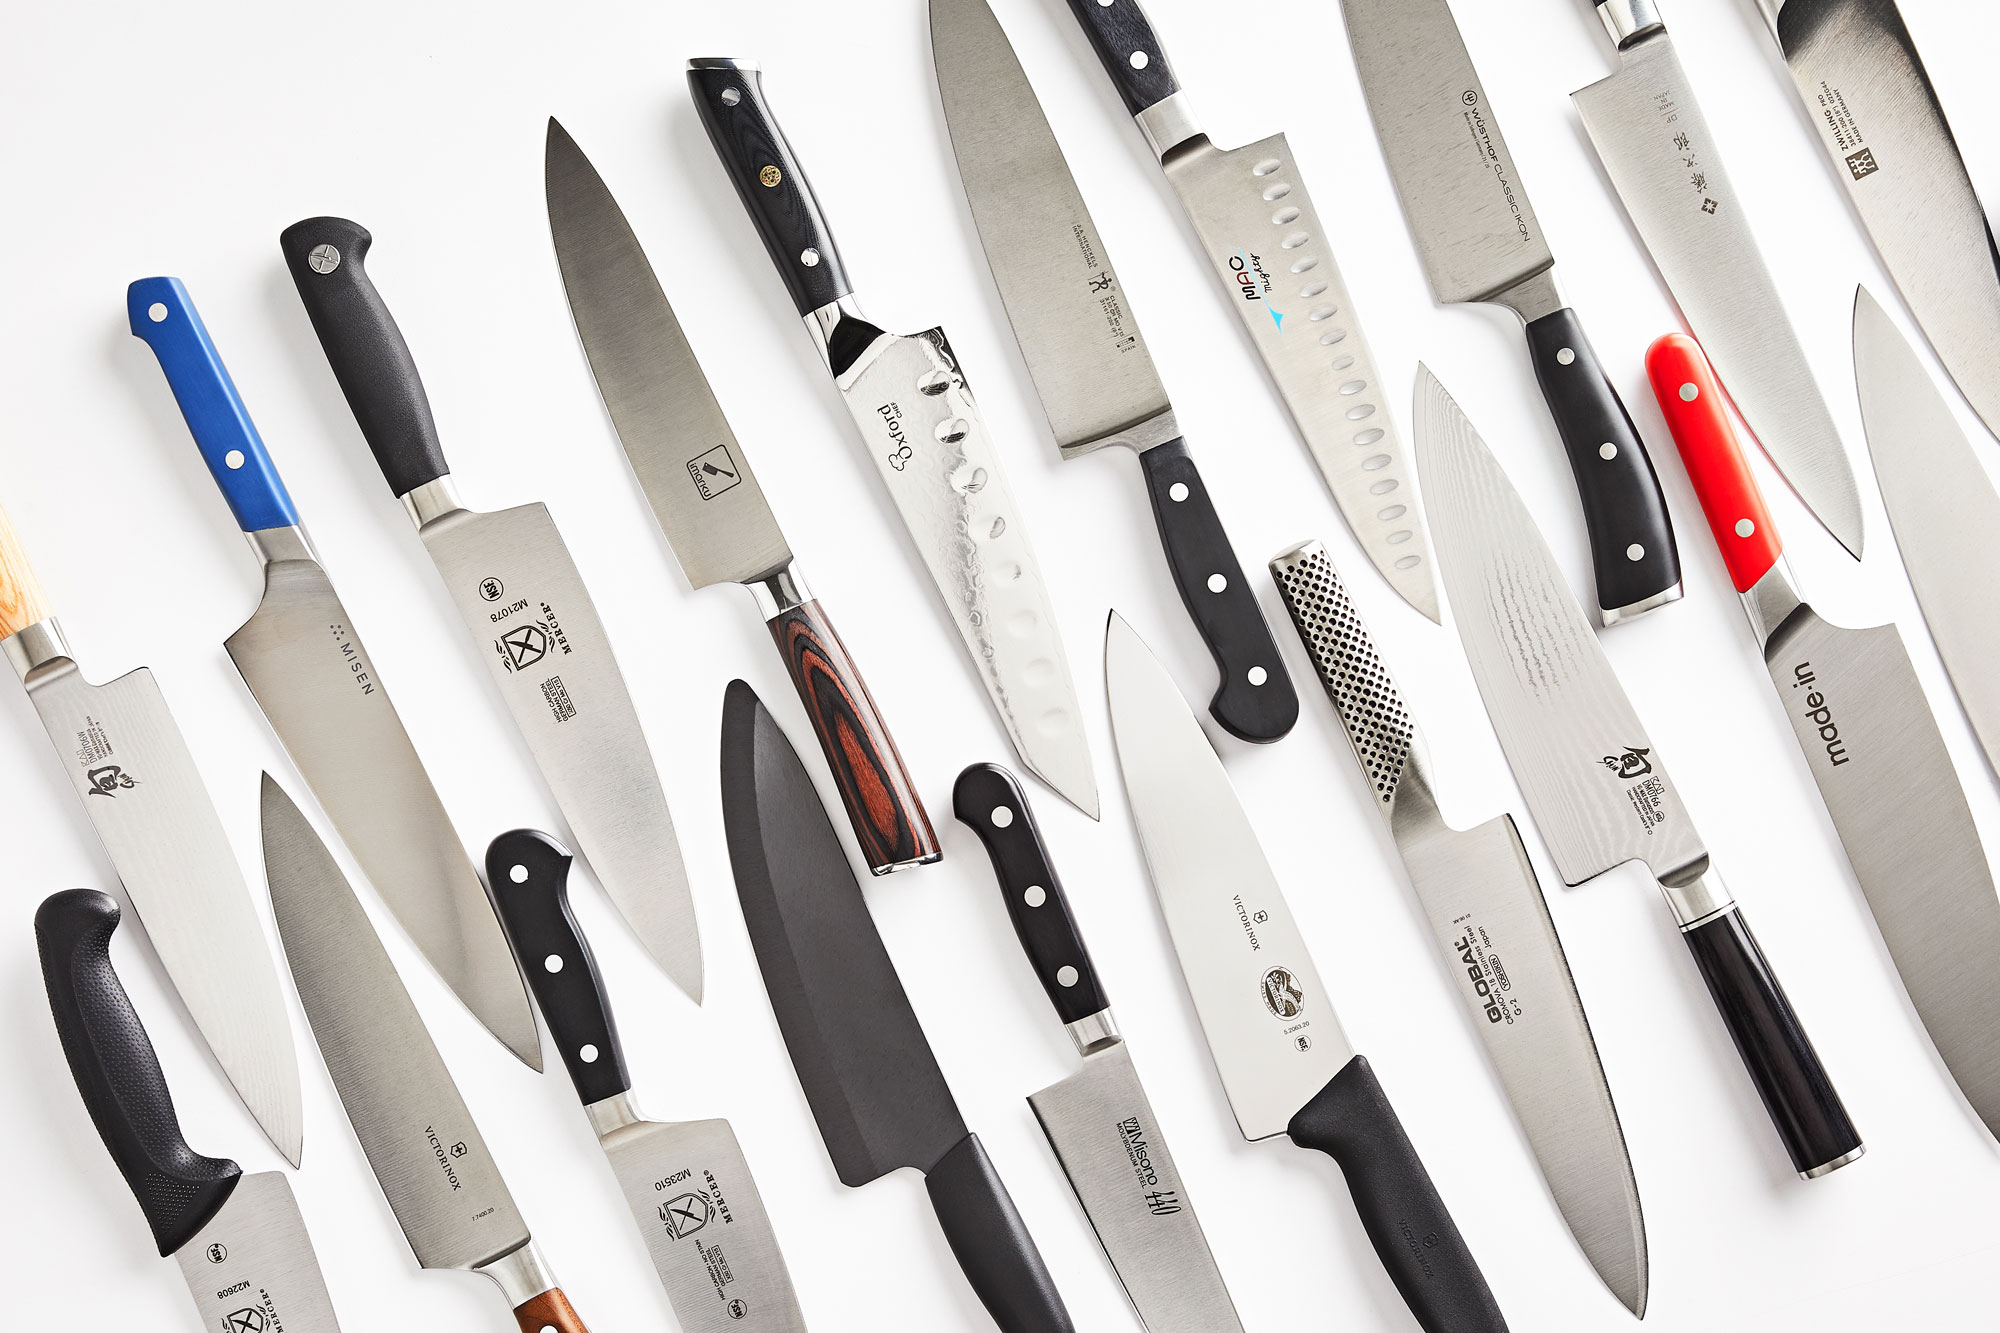 Top 7 Best Chef Knives for Left-Handers 2022